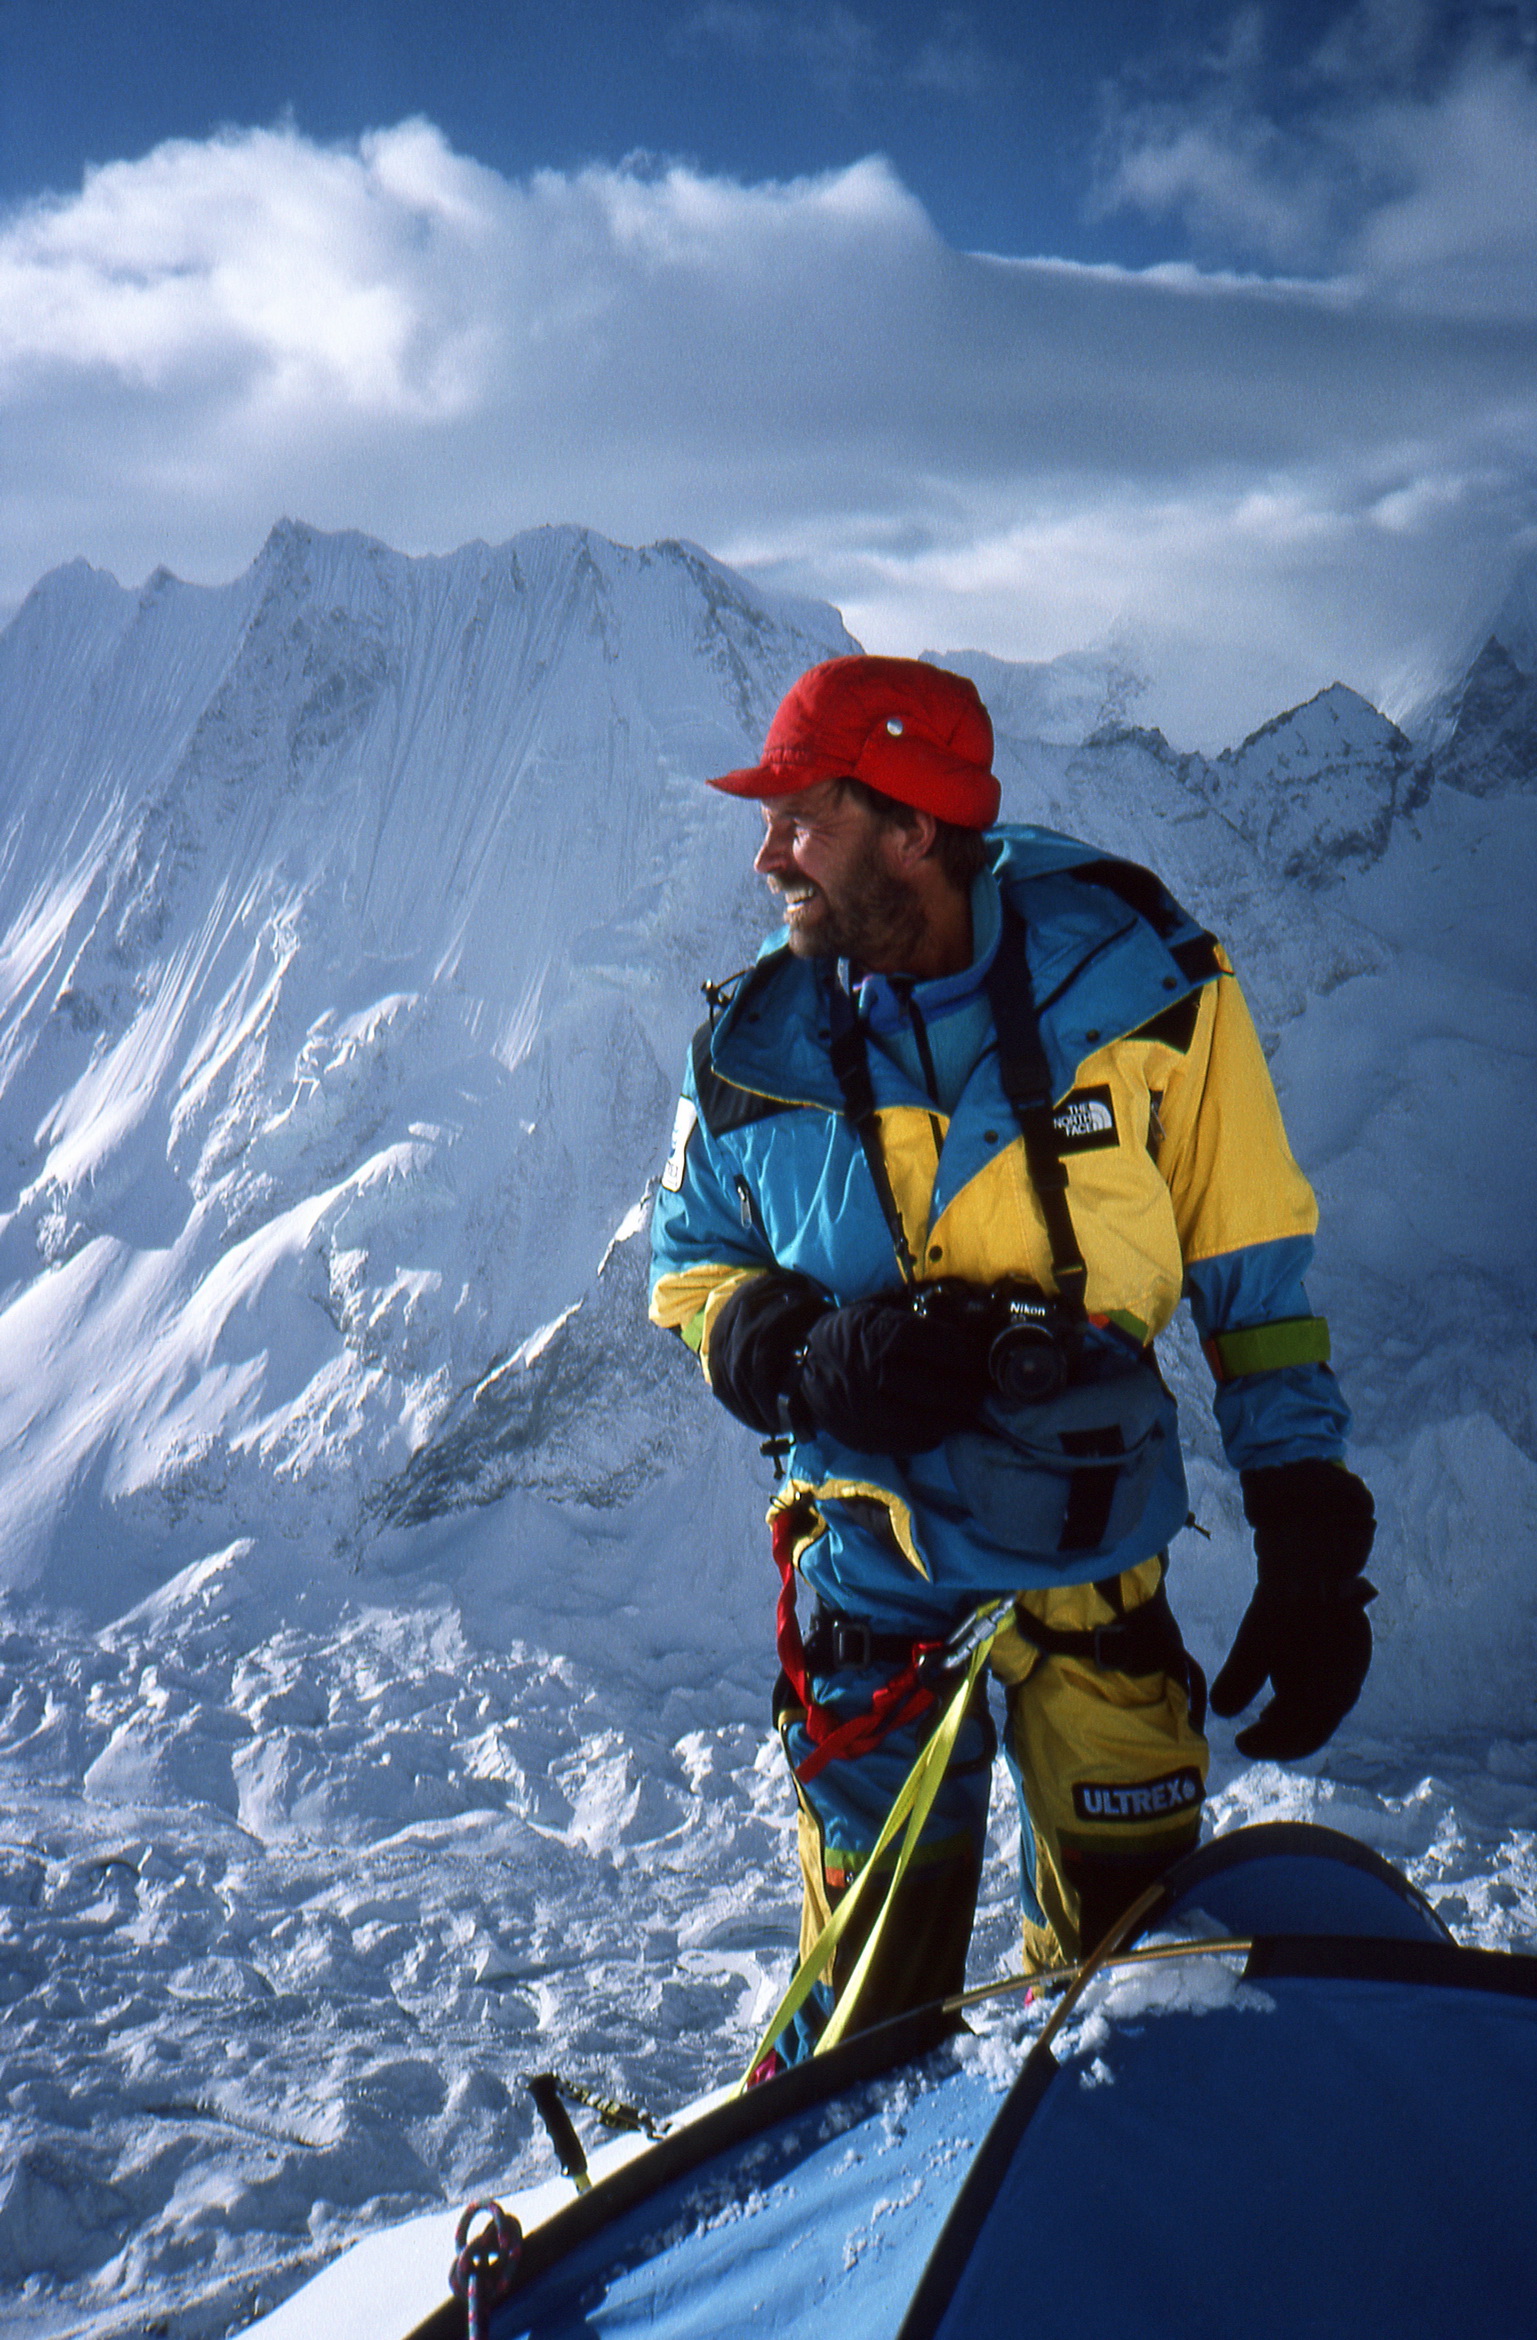 John Roskelley at Camp 3 on Menlungtse (7181m), Tibet, in 1990. [Photo] John Roskelley collection